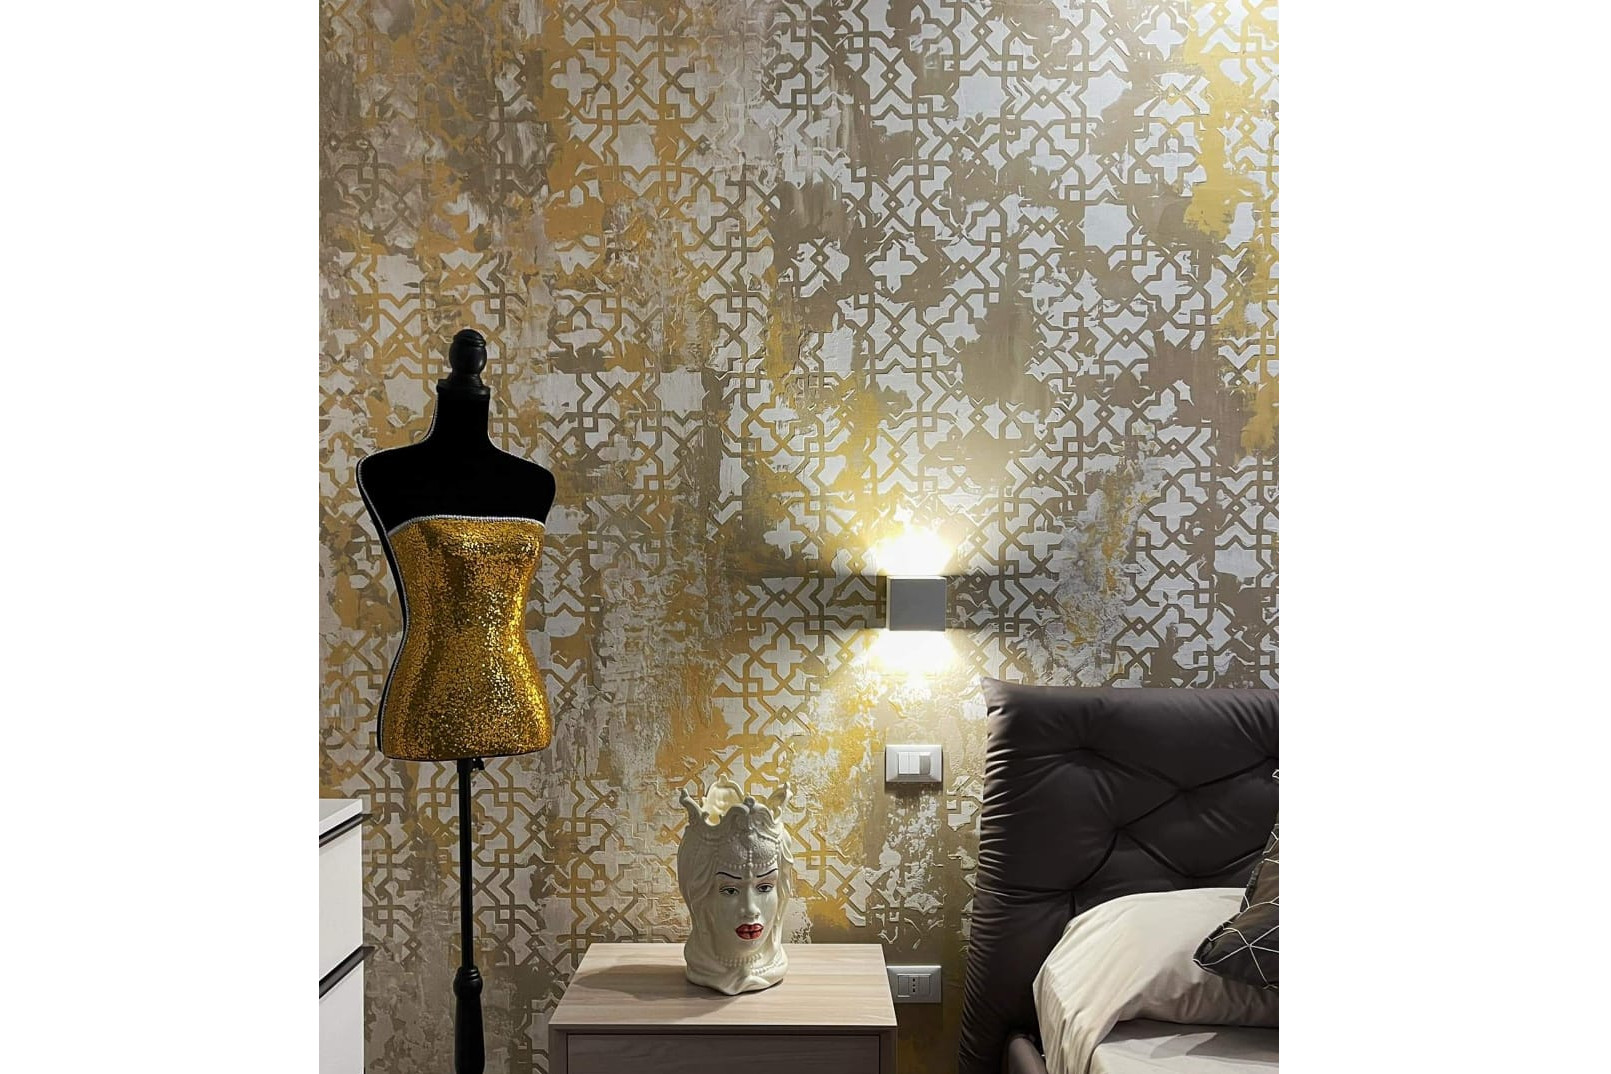 NovaColor Calcecruda Yellow Calcecruda Pattern6 wall texture painting design for Bedroom,Kids Room